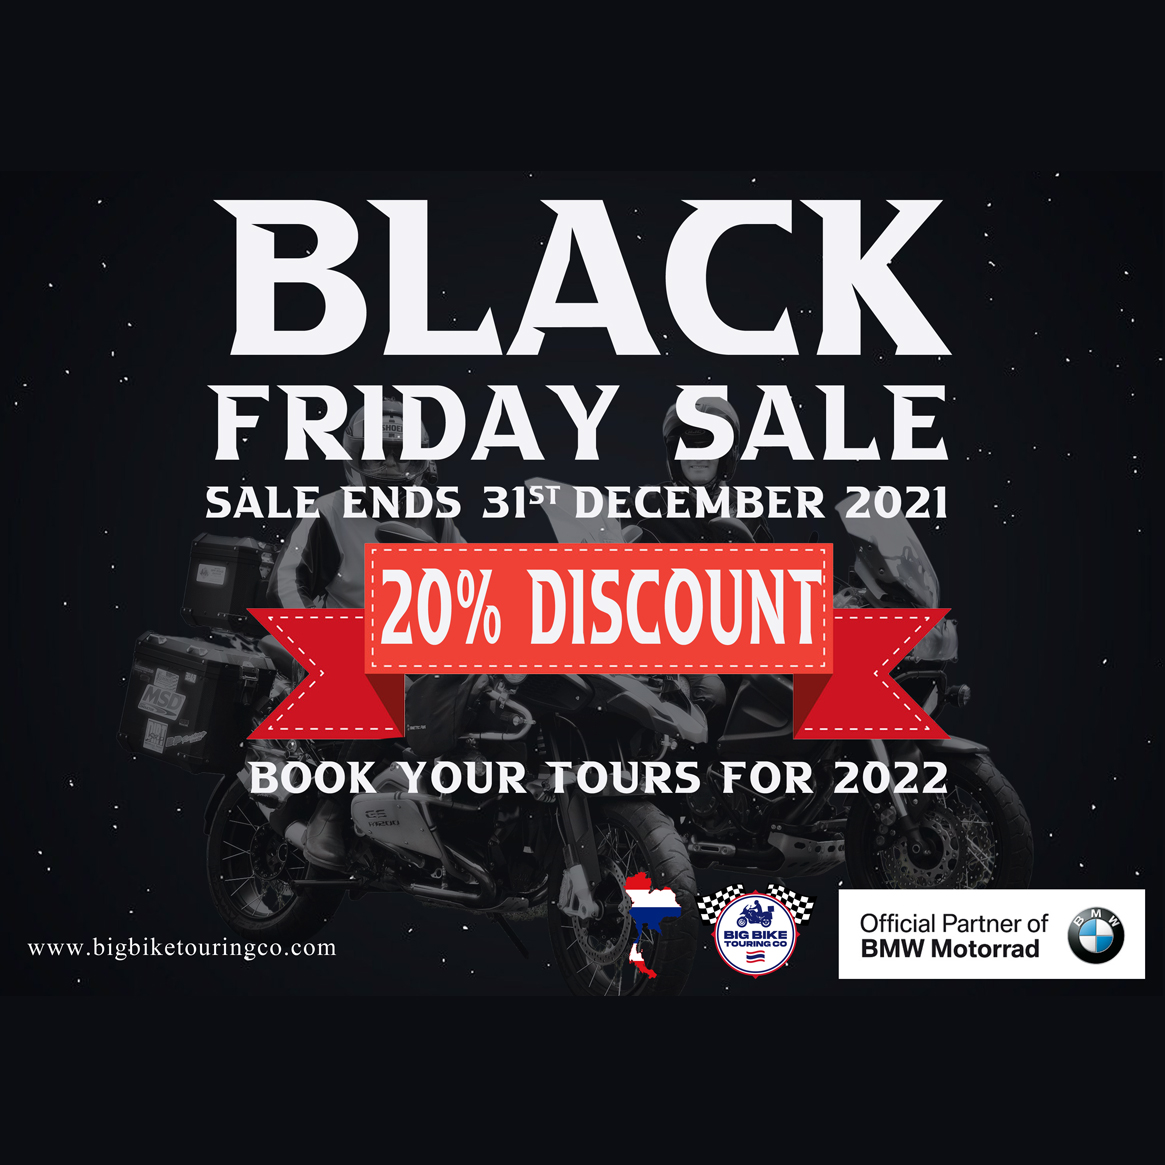 Black Friday Sale - Thailand Motorcycle tour